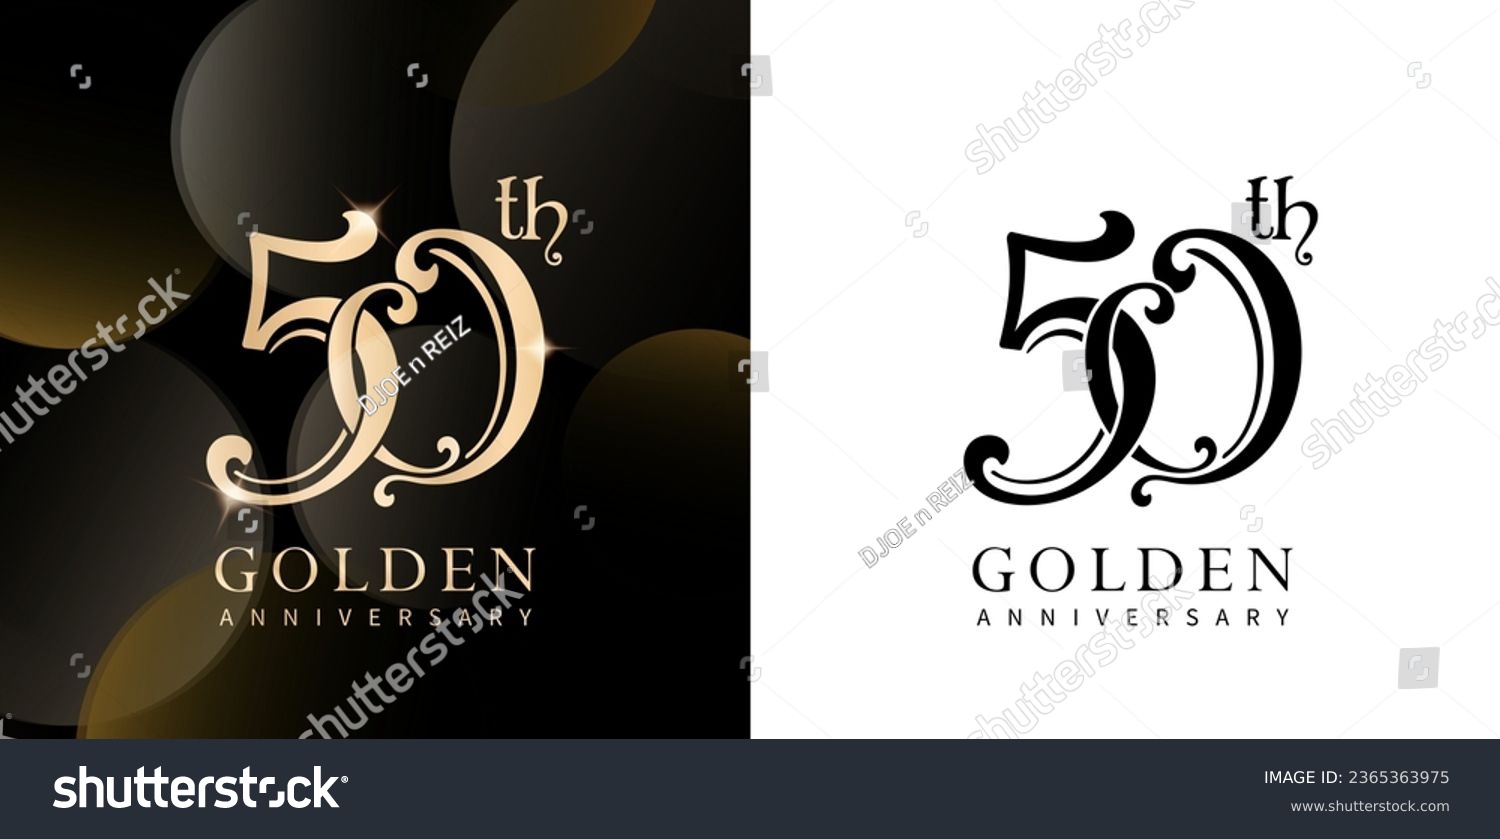 SVG of 50 Years golden Anniversary Celebration Logo with Gold and Black colors isolated backgrounds for wedding invitation card, User interface and experience designs, event stationery, Branding and identity svg